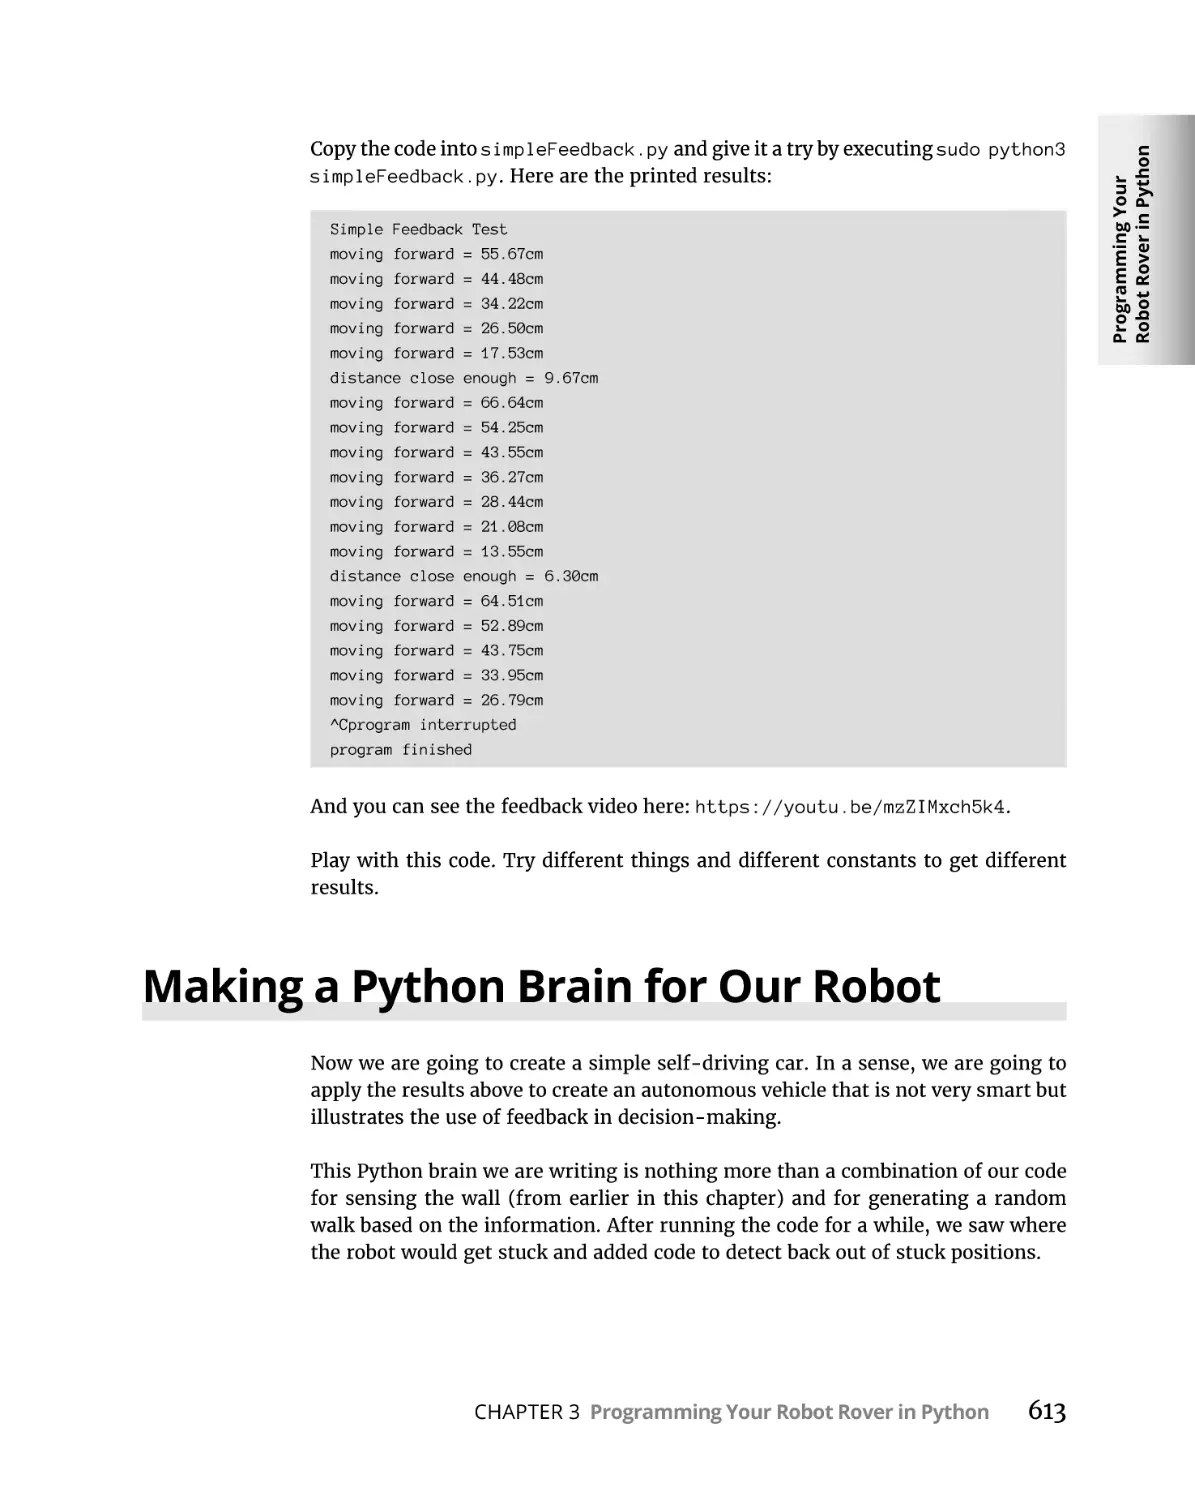 Making a Python Brain for Our Robot